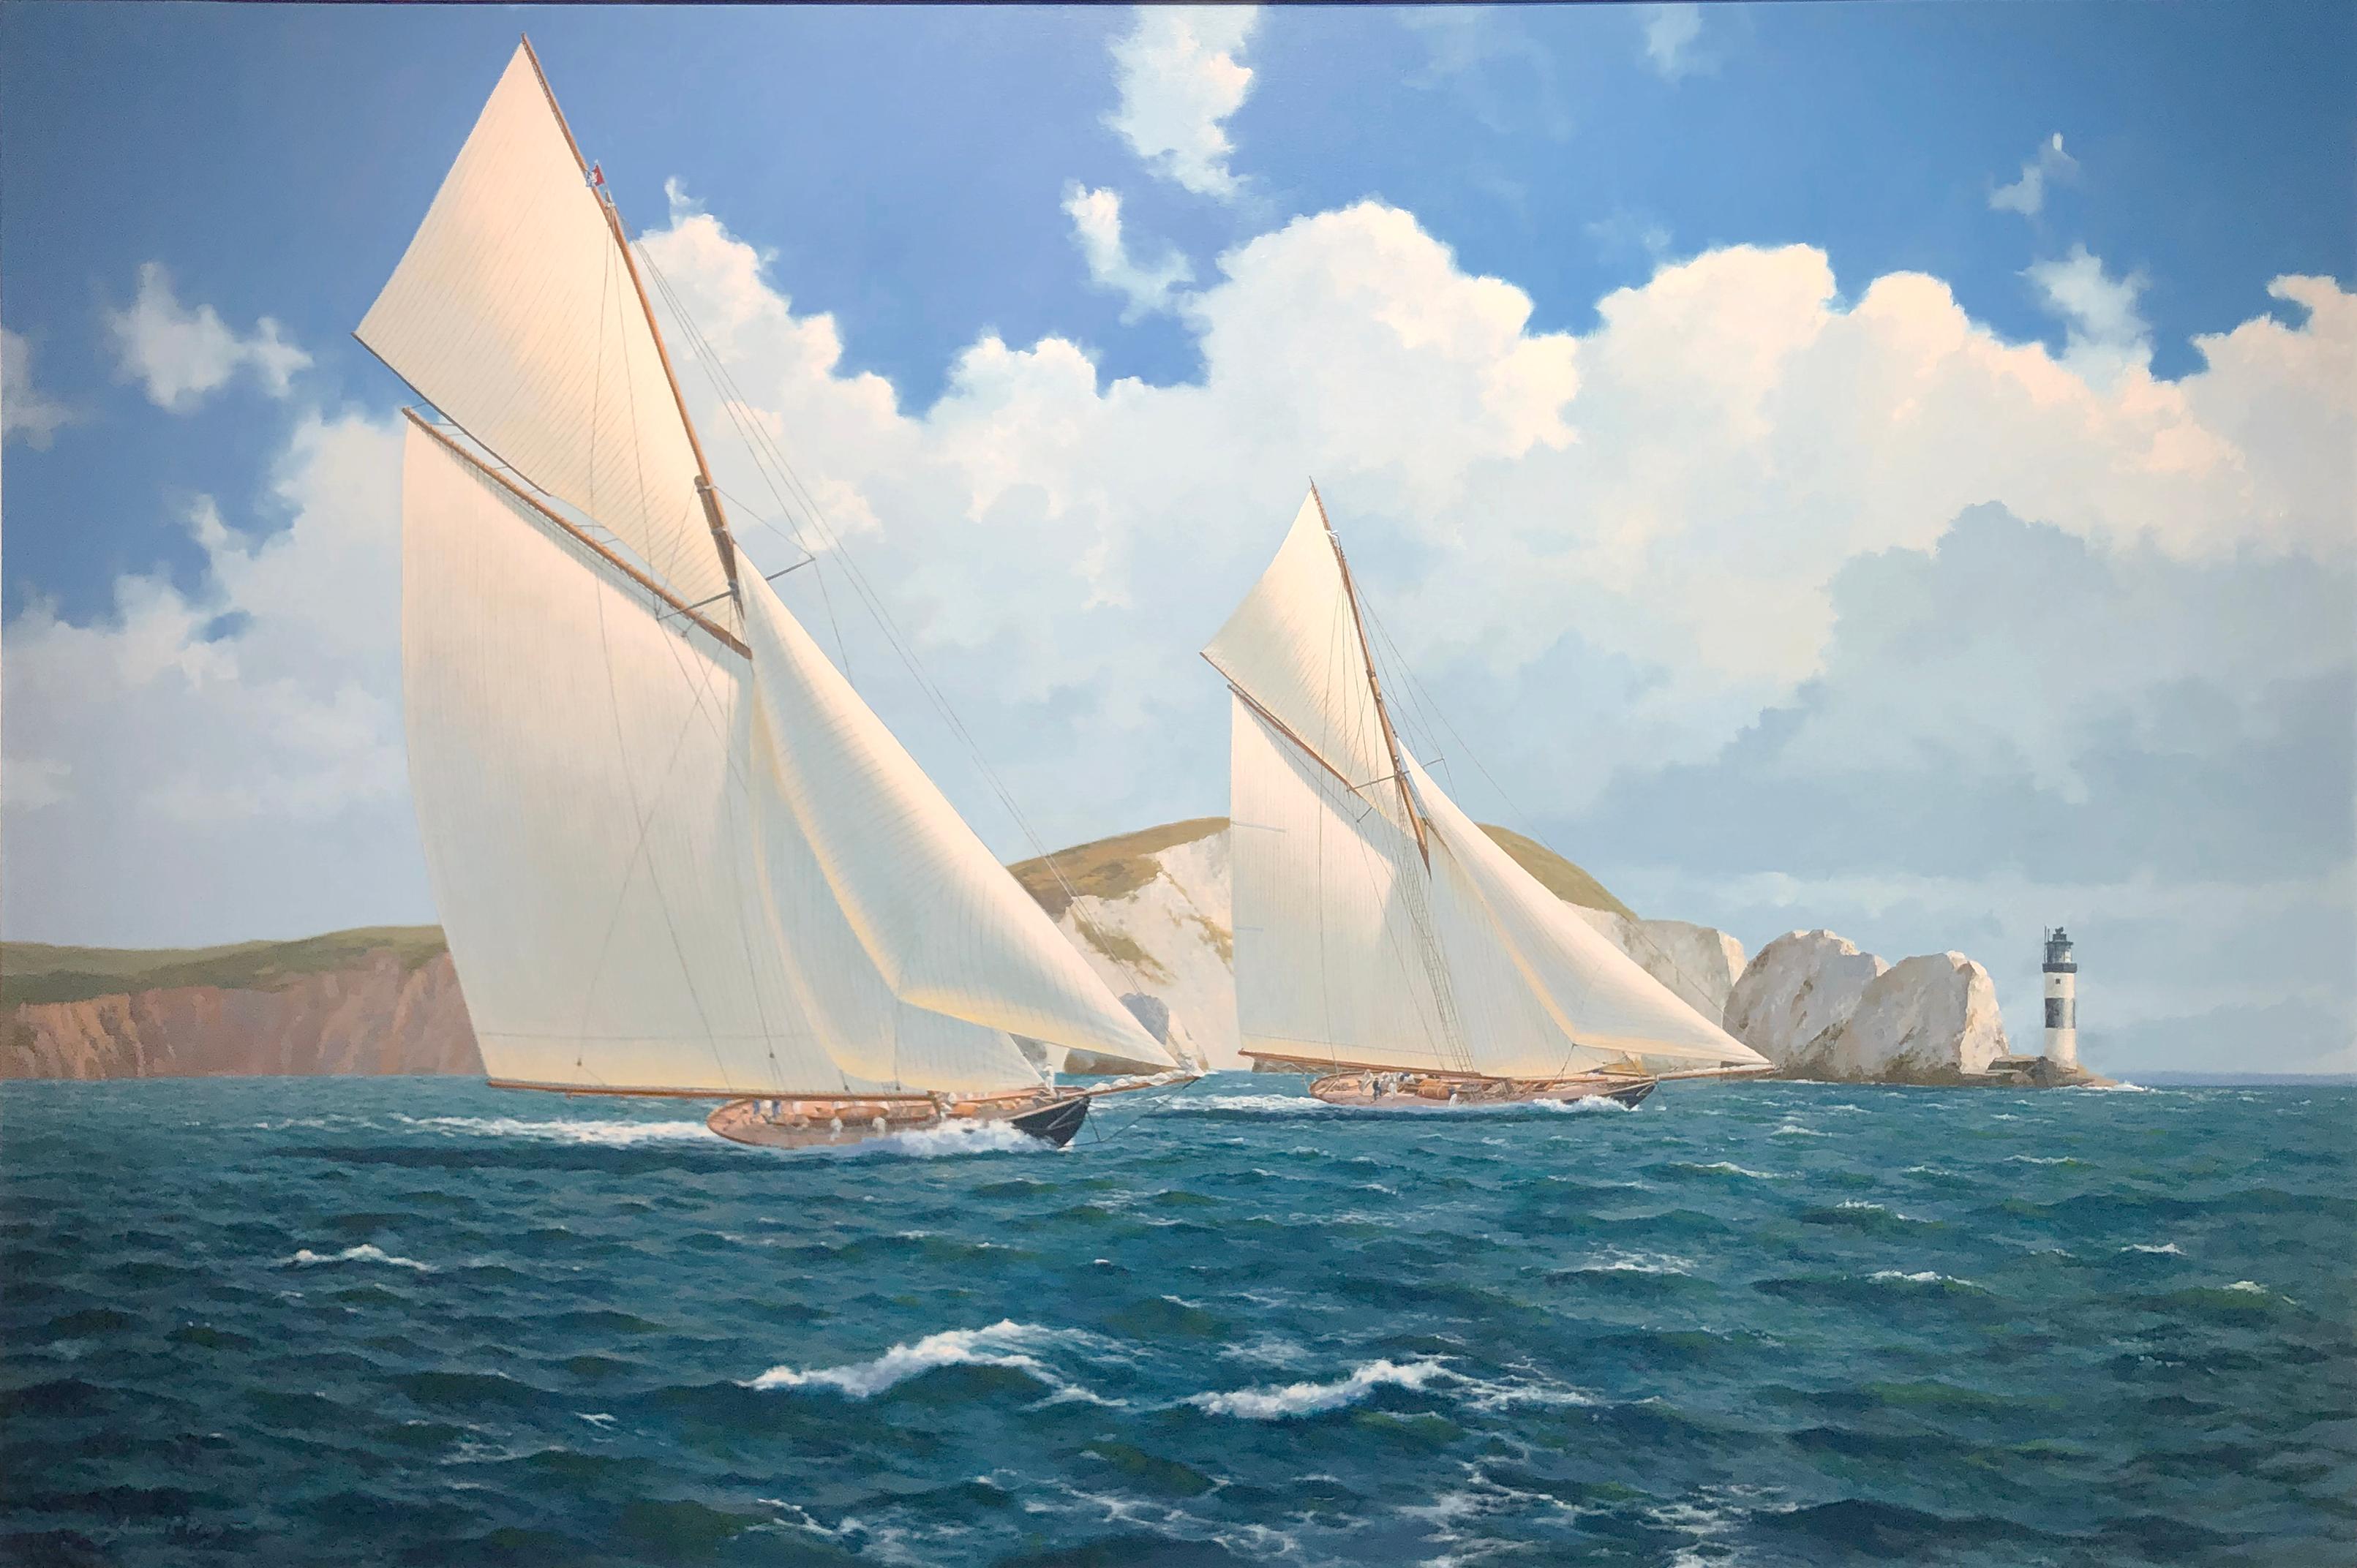 Yachts Navajoe and Britannia both were constructed at the end of the 1800s, commissioned by UK royalty. This painting depicts a neck-and-neck race between the two giants off the coast of Dover, England. Sailors in their white and blue uniforms can